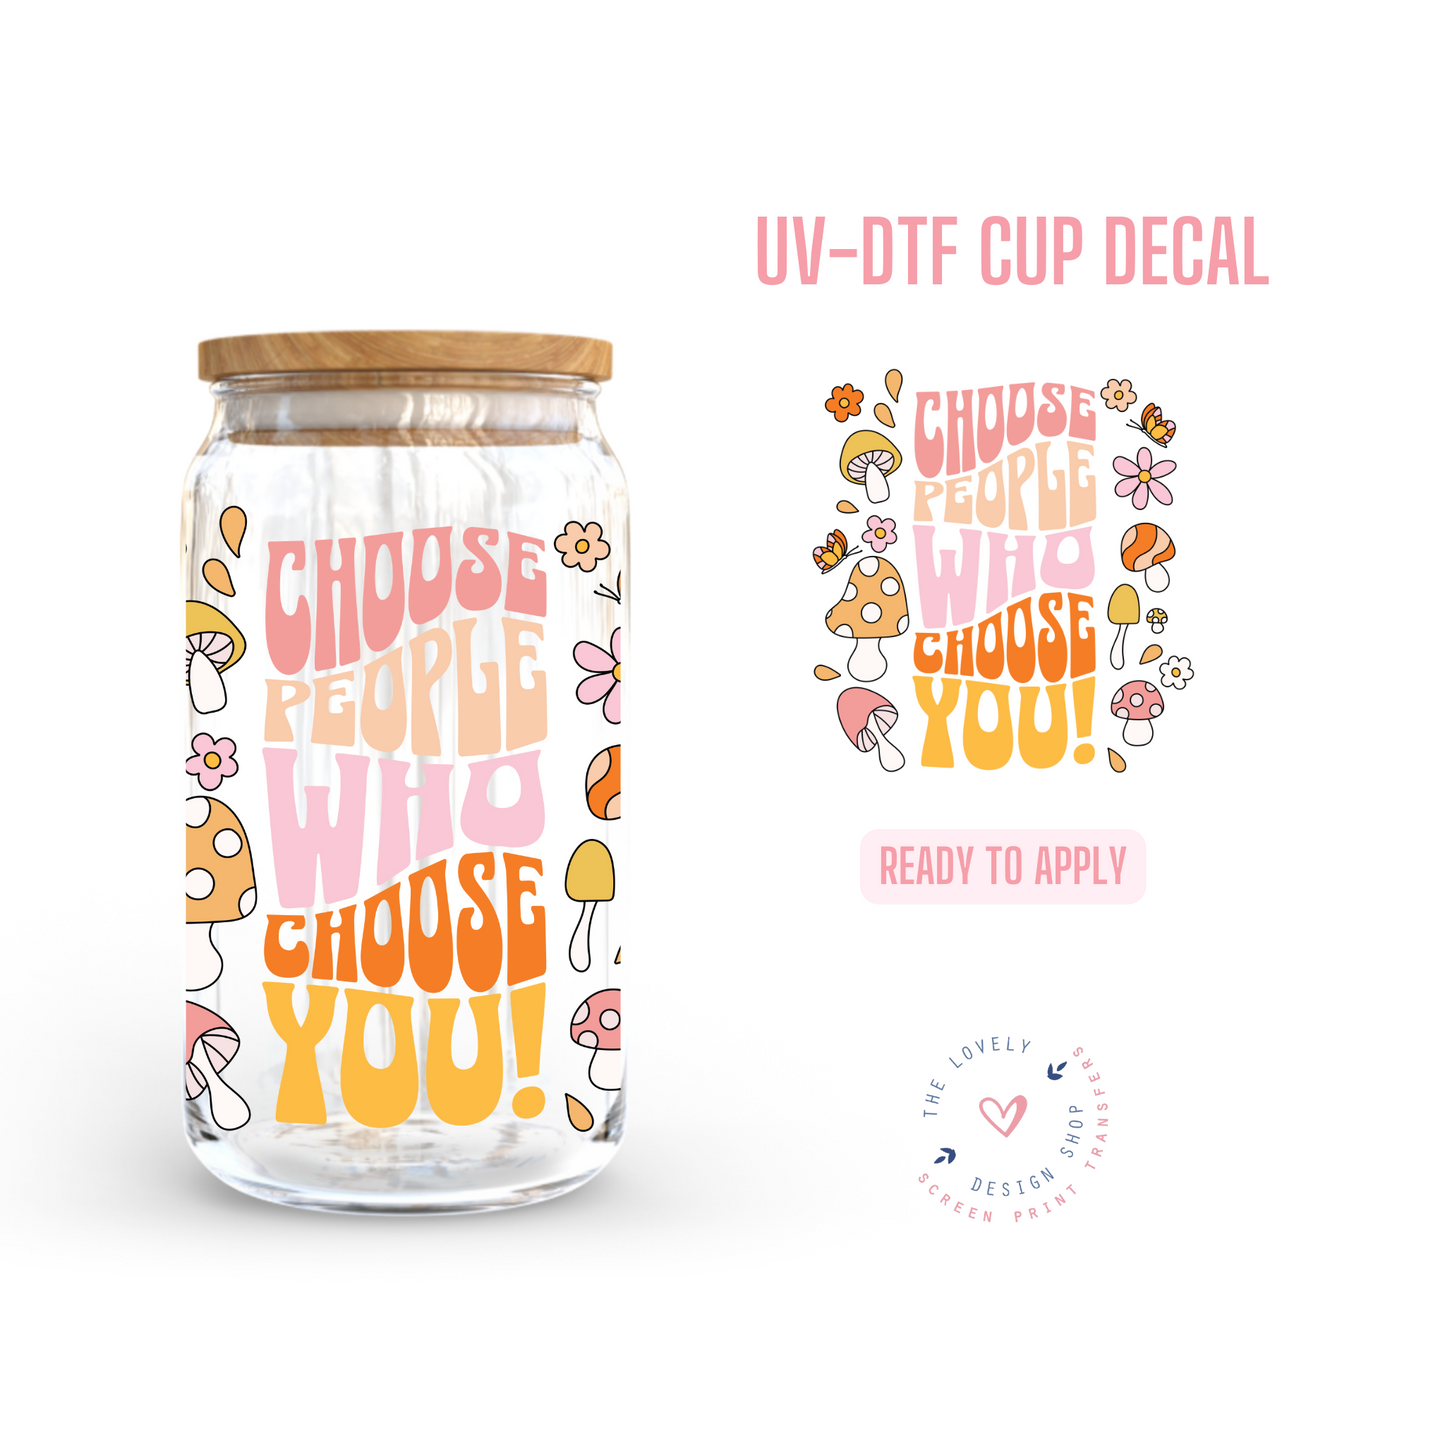 Choose Ppl Who Choose You! - UV DTF Cup Decal (Ready to Ship) Mar 26